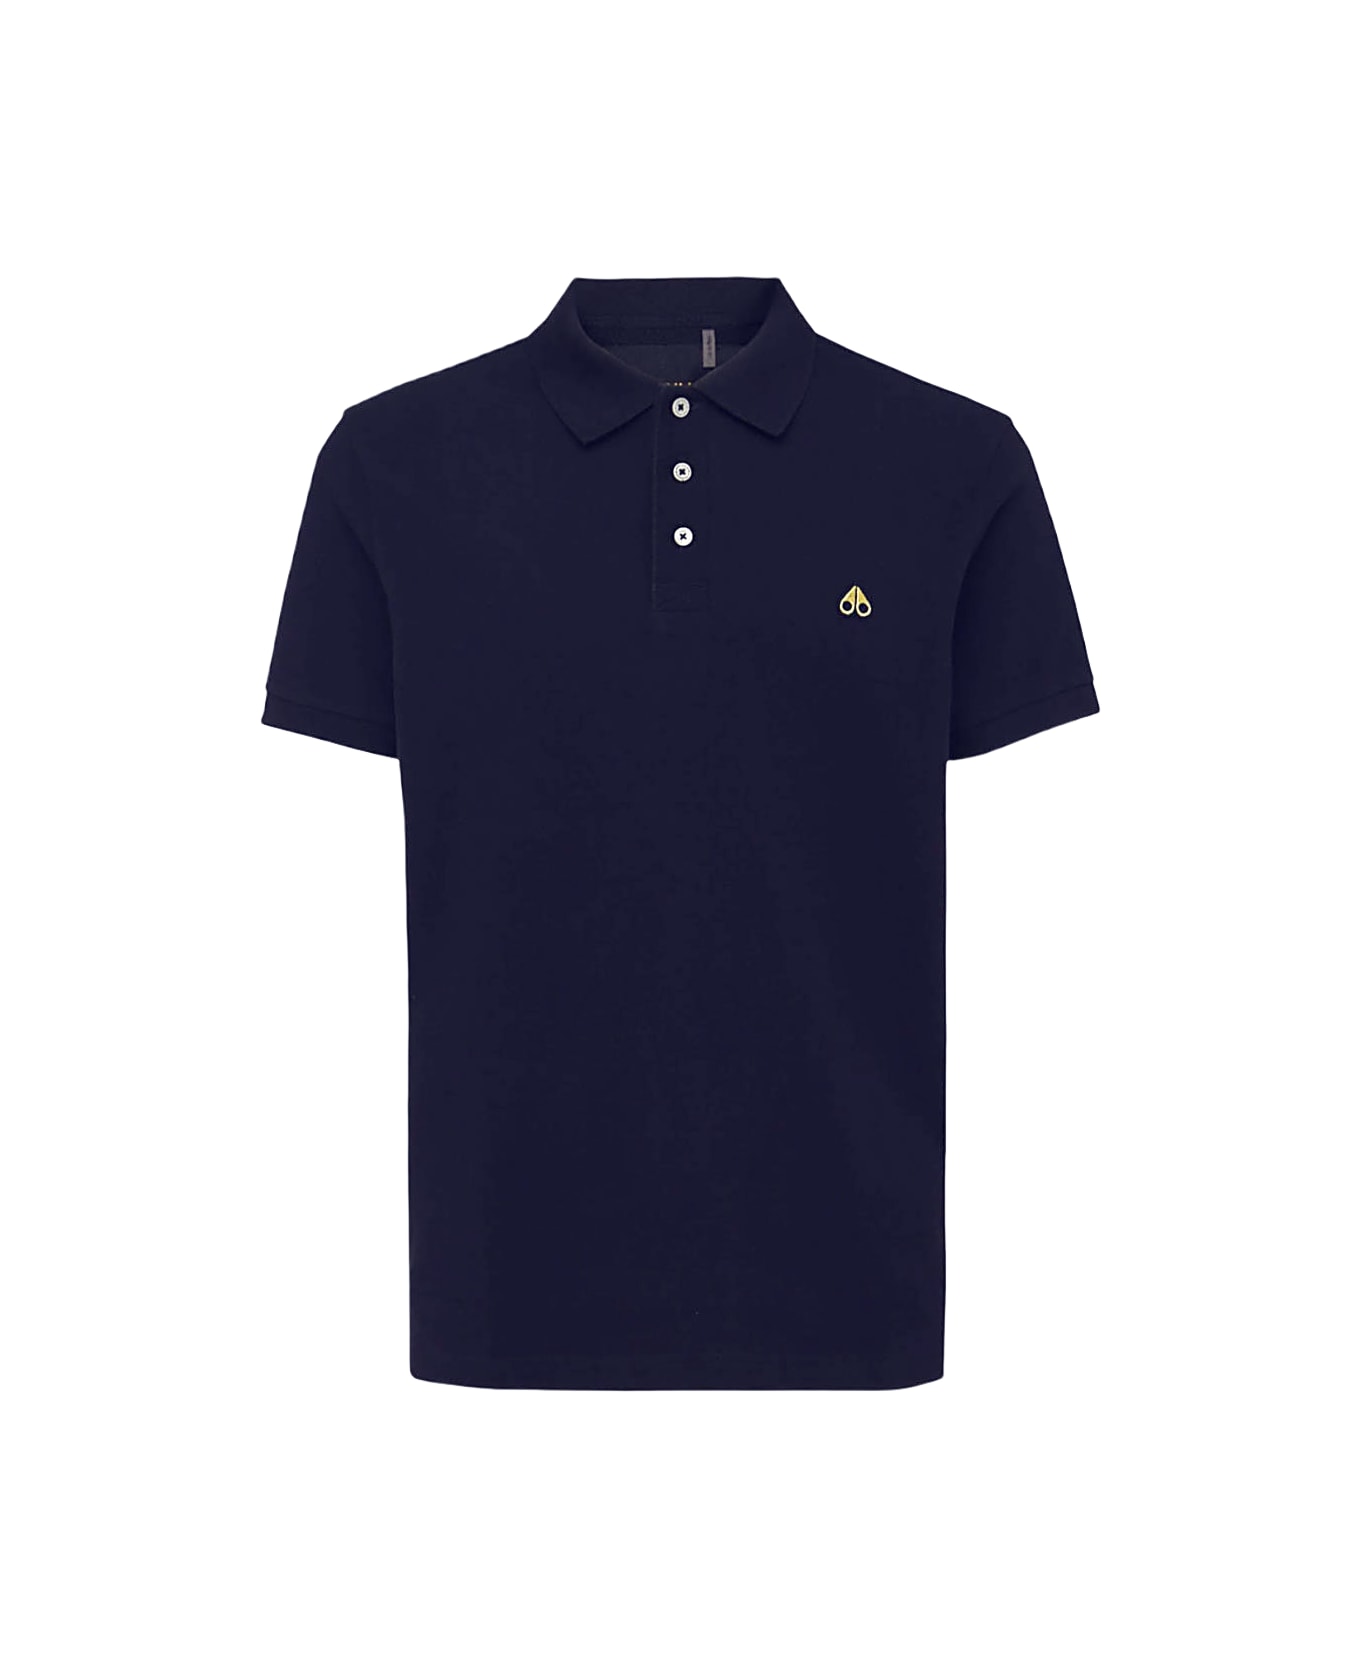 Moose Knuckles Navy Blue Cotton Polo Shirt - Blue